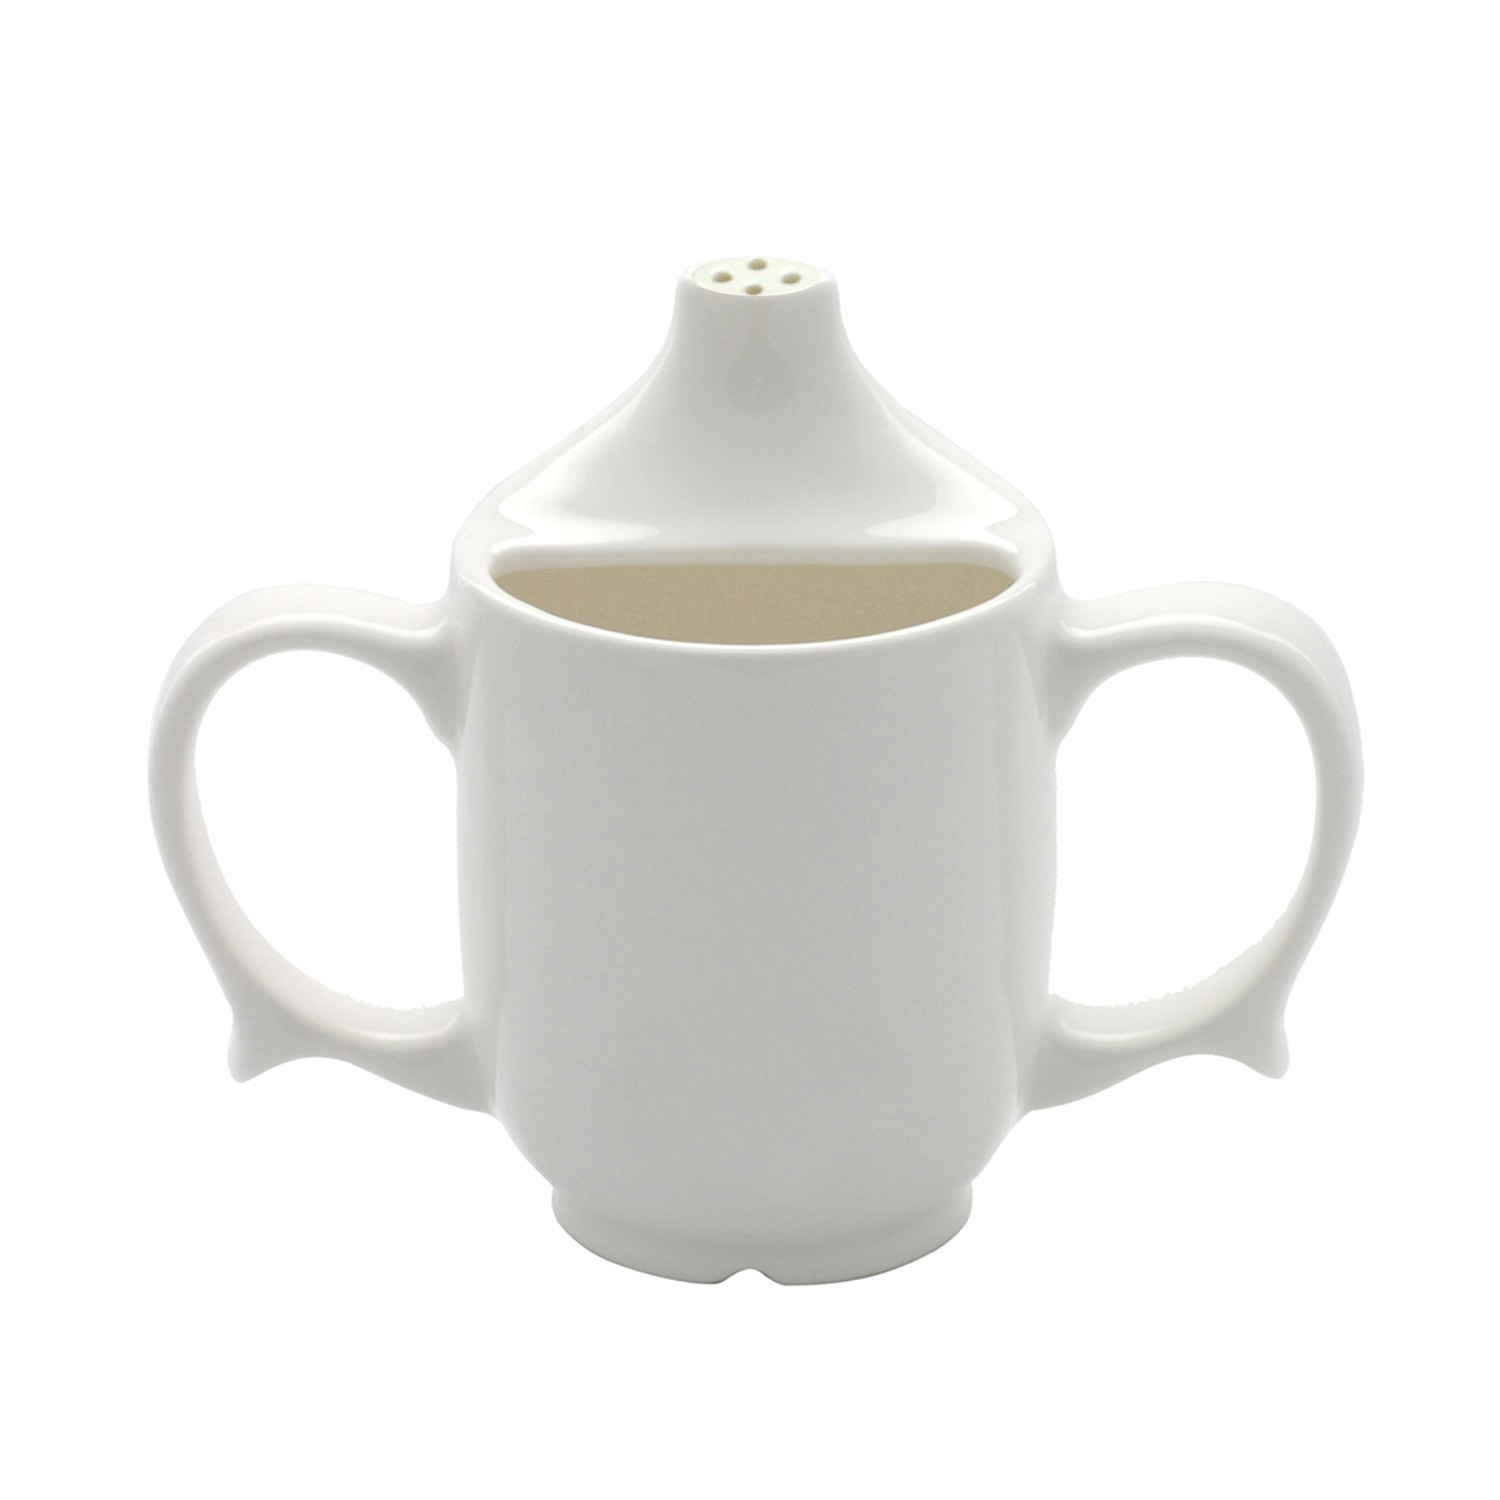 Dignity - Two Handled Ceramic Feeder Cup with Pierced Spout - 250ml - White